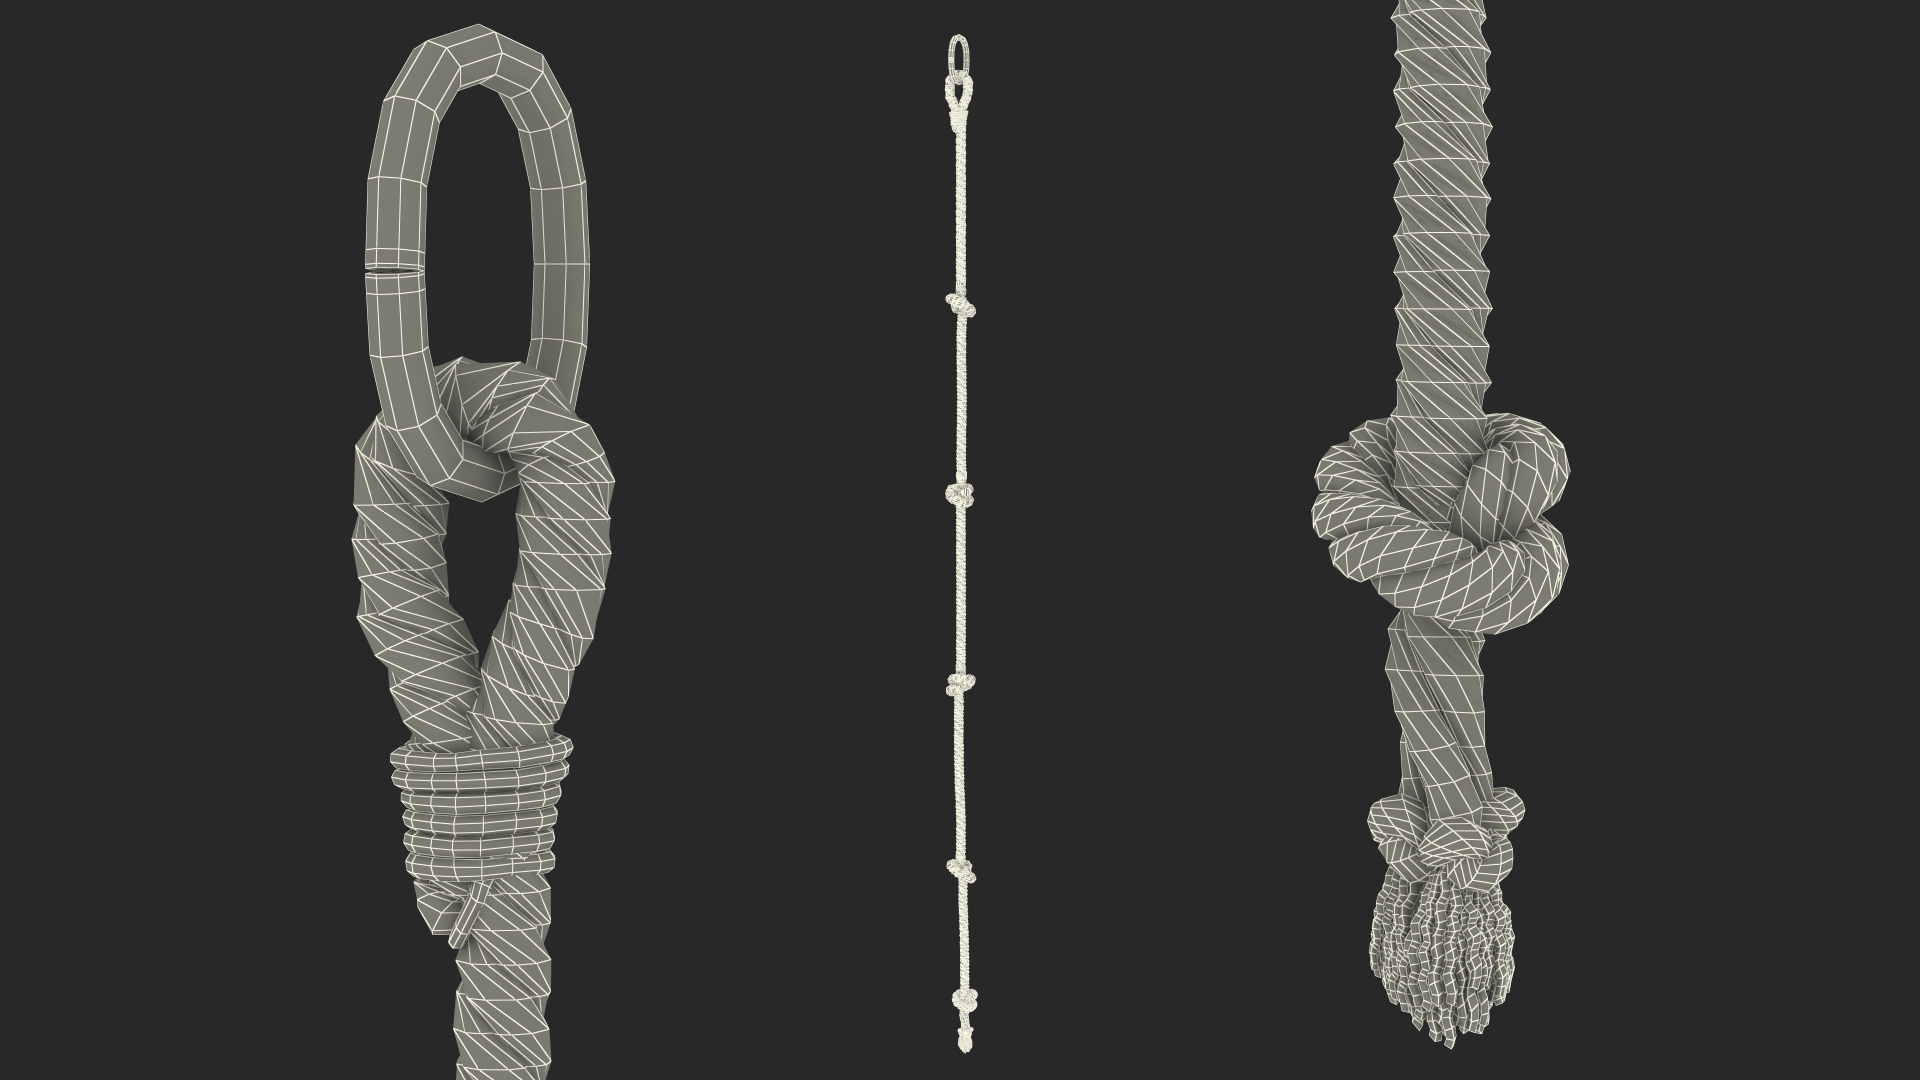 5,293 Unity Rope Images, Stock Photos, 3D objects, & Vectors